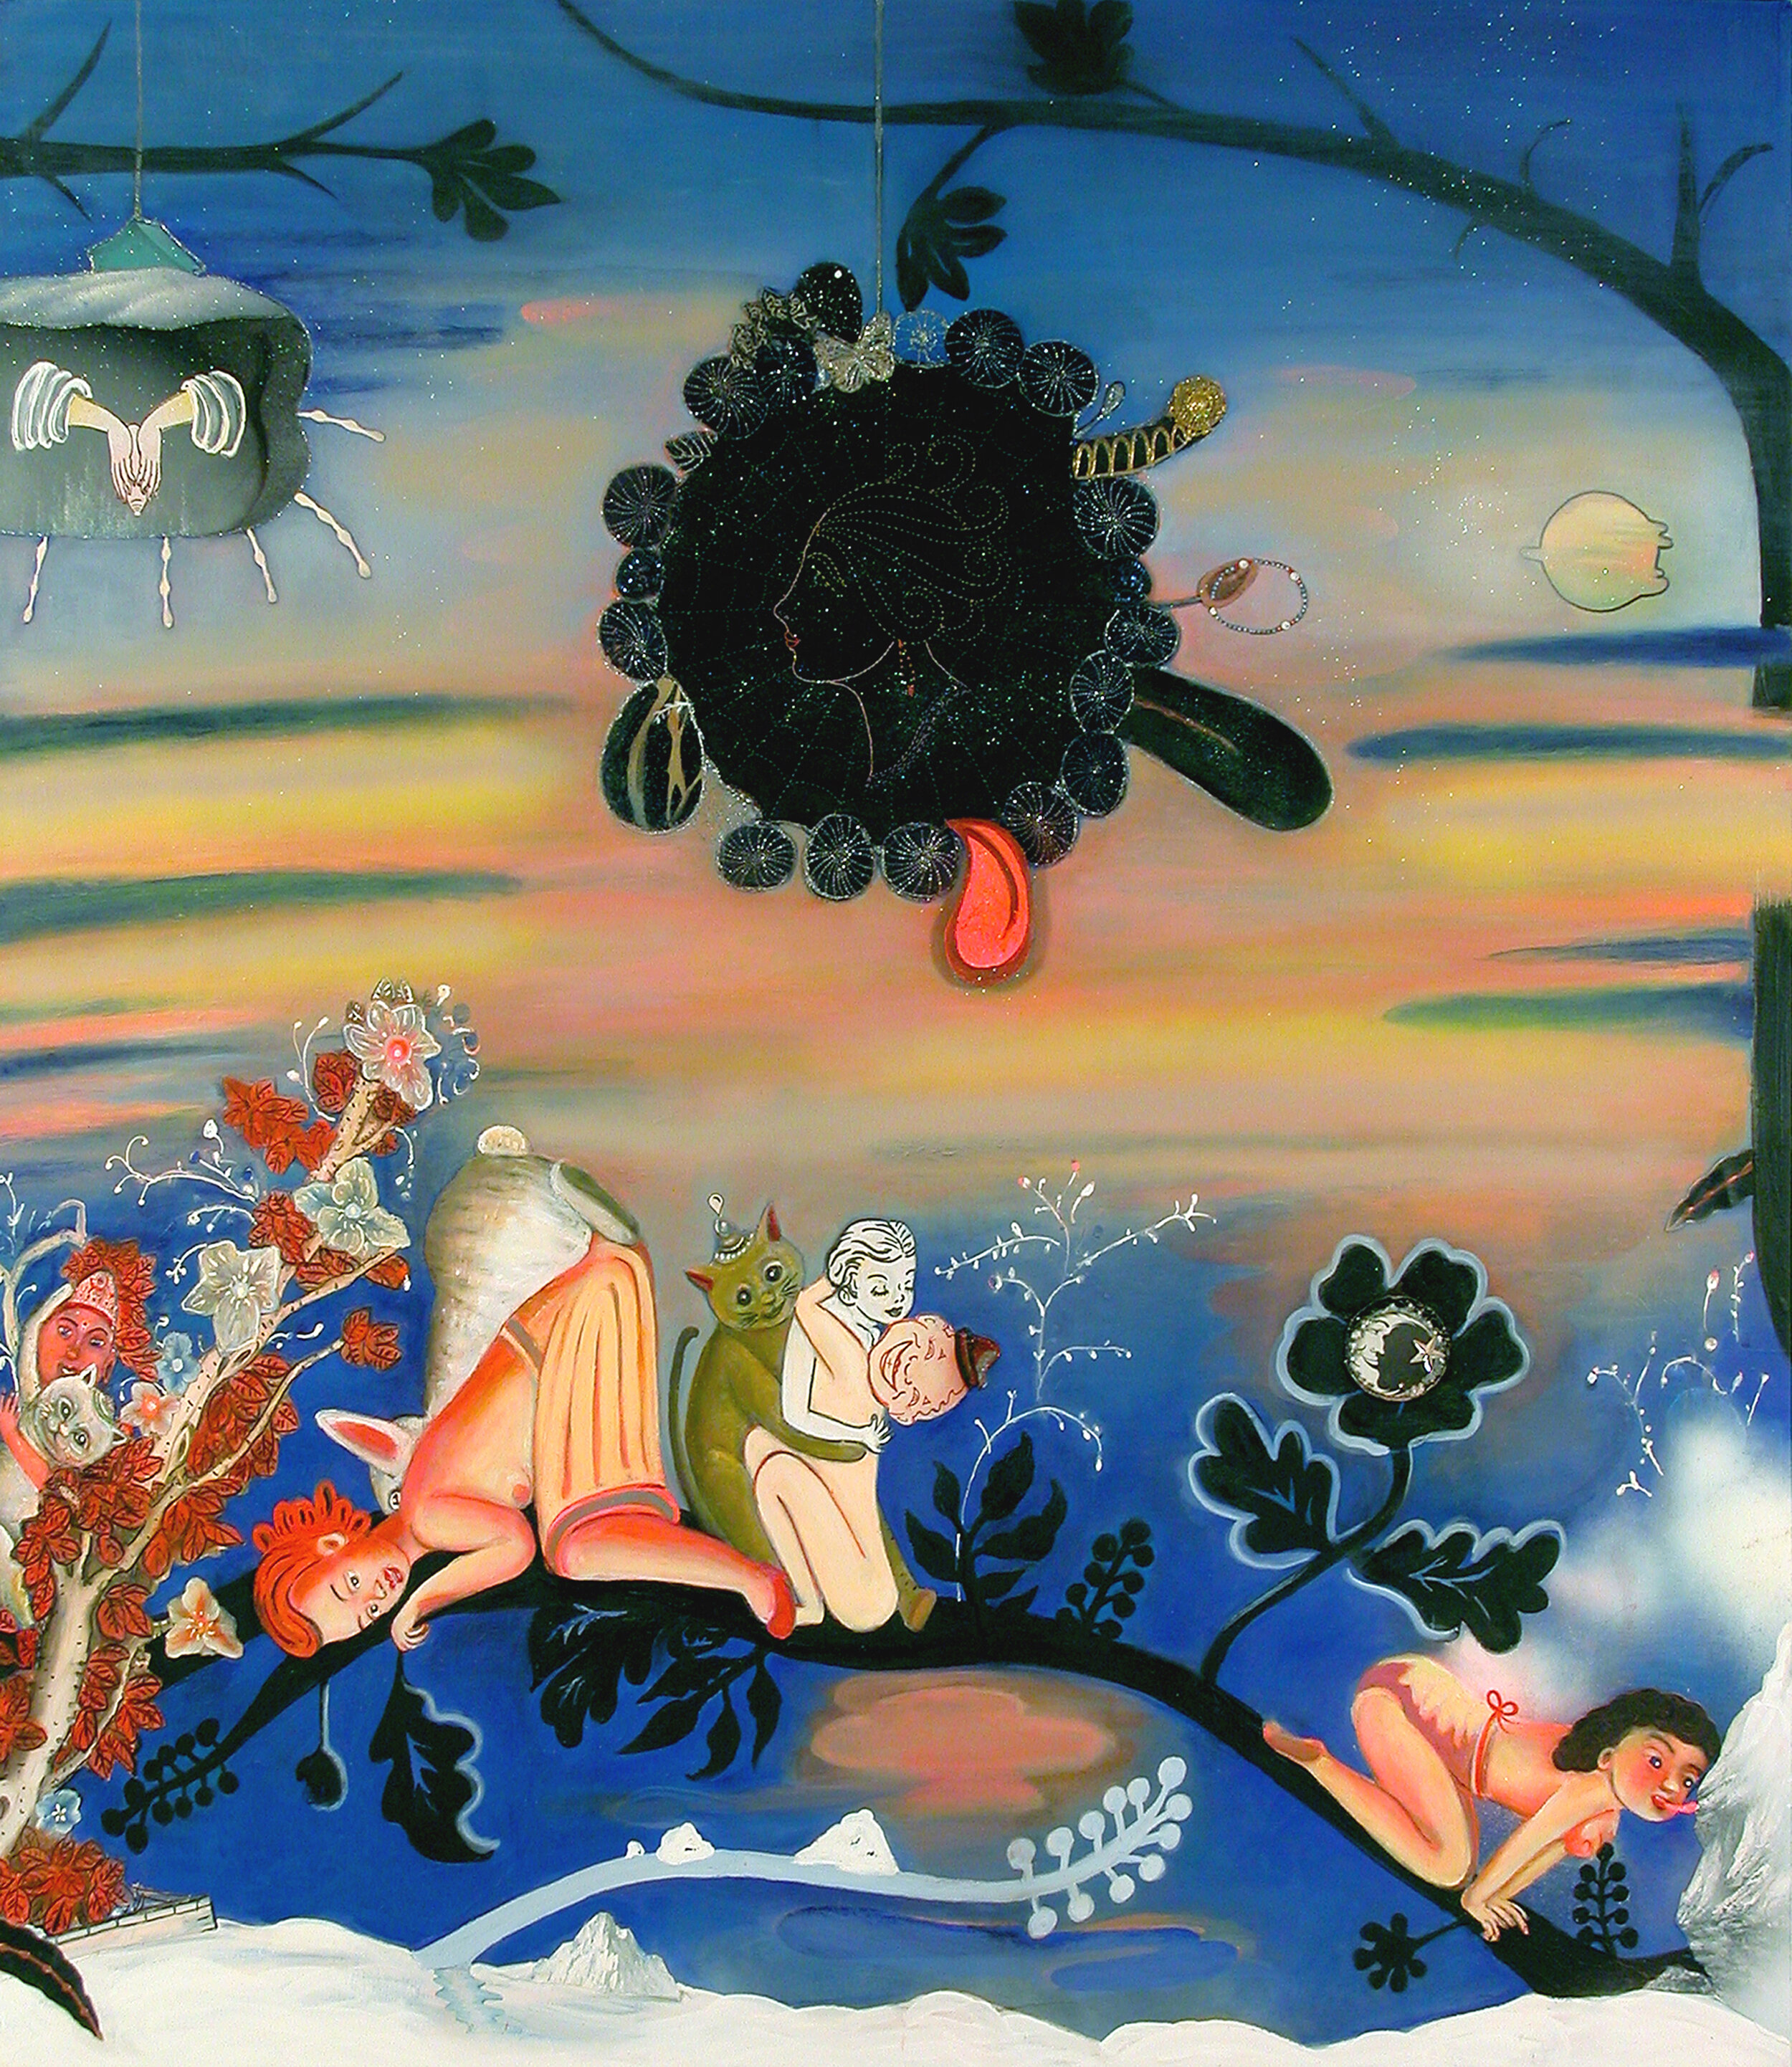 Passions Due to Peculiarities of Habit, 70" × 60", mixed media and collage on canvas, 2006